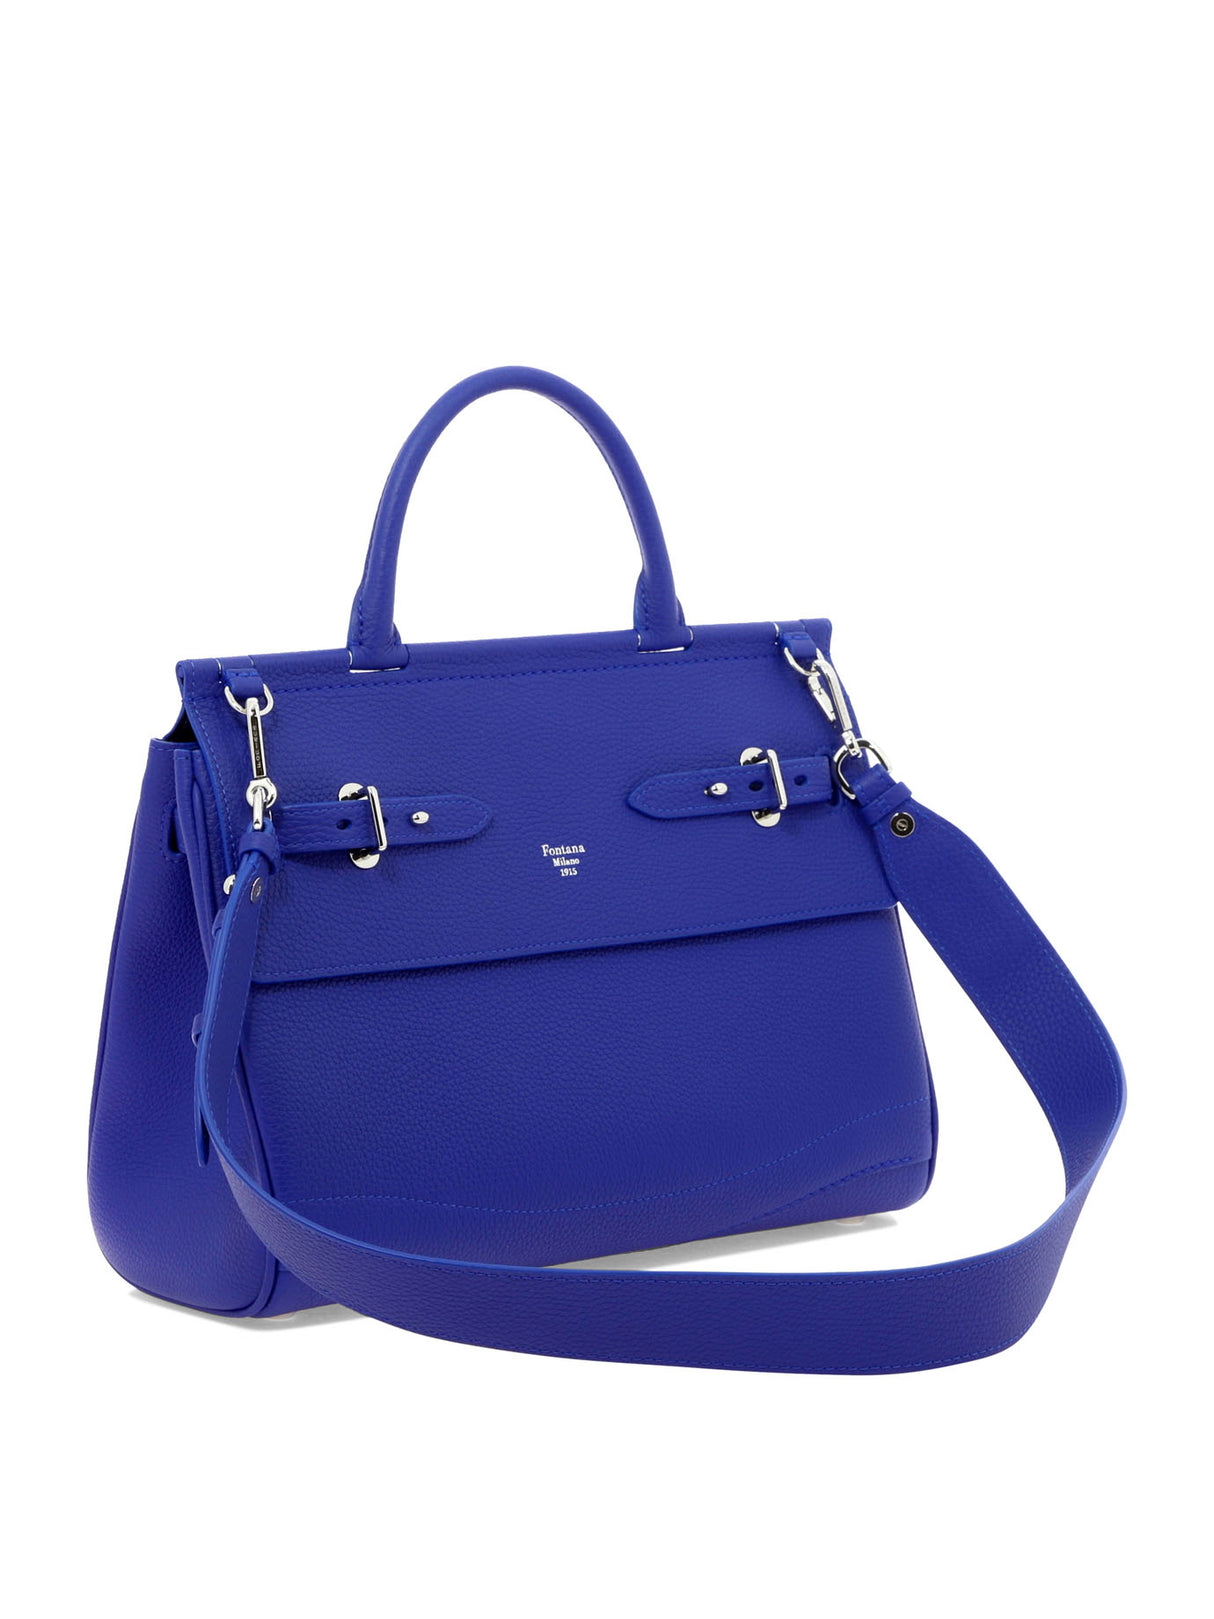 FONTANA MILANO 1915 Blue Leather Handbag with Belt Closure and Open Pockets for Women